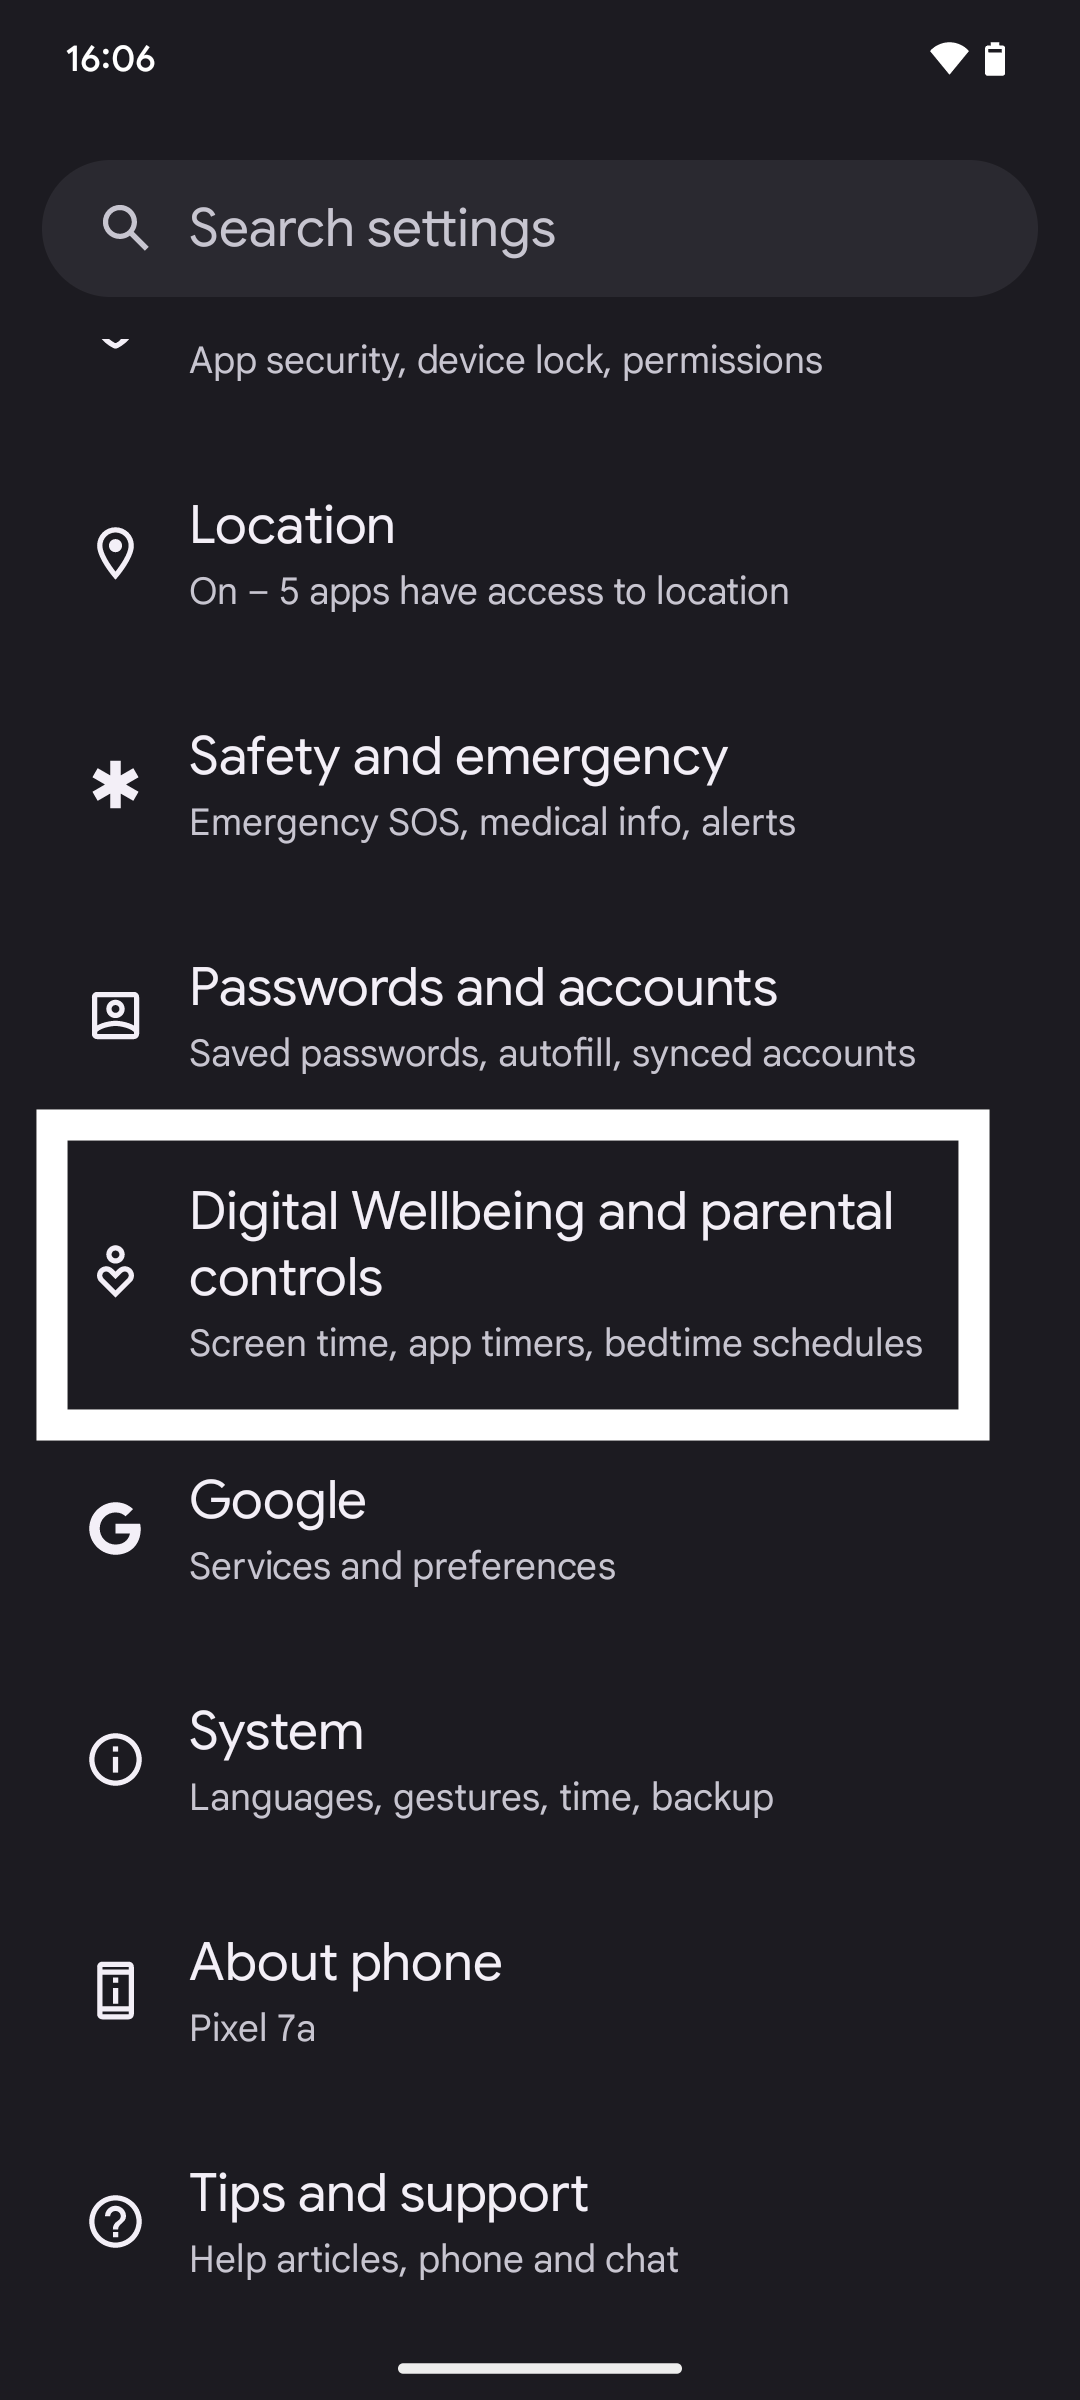 Android Settings with Digital Wellbeing highlighted